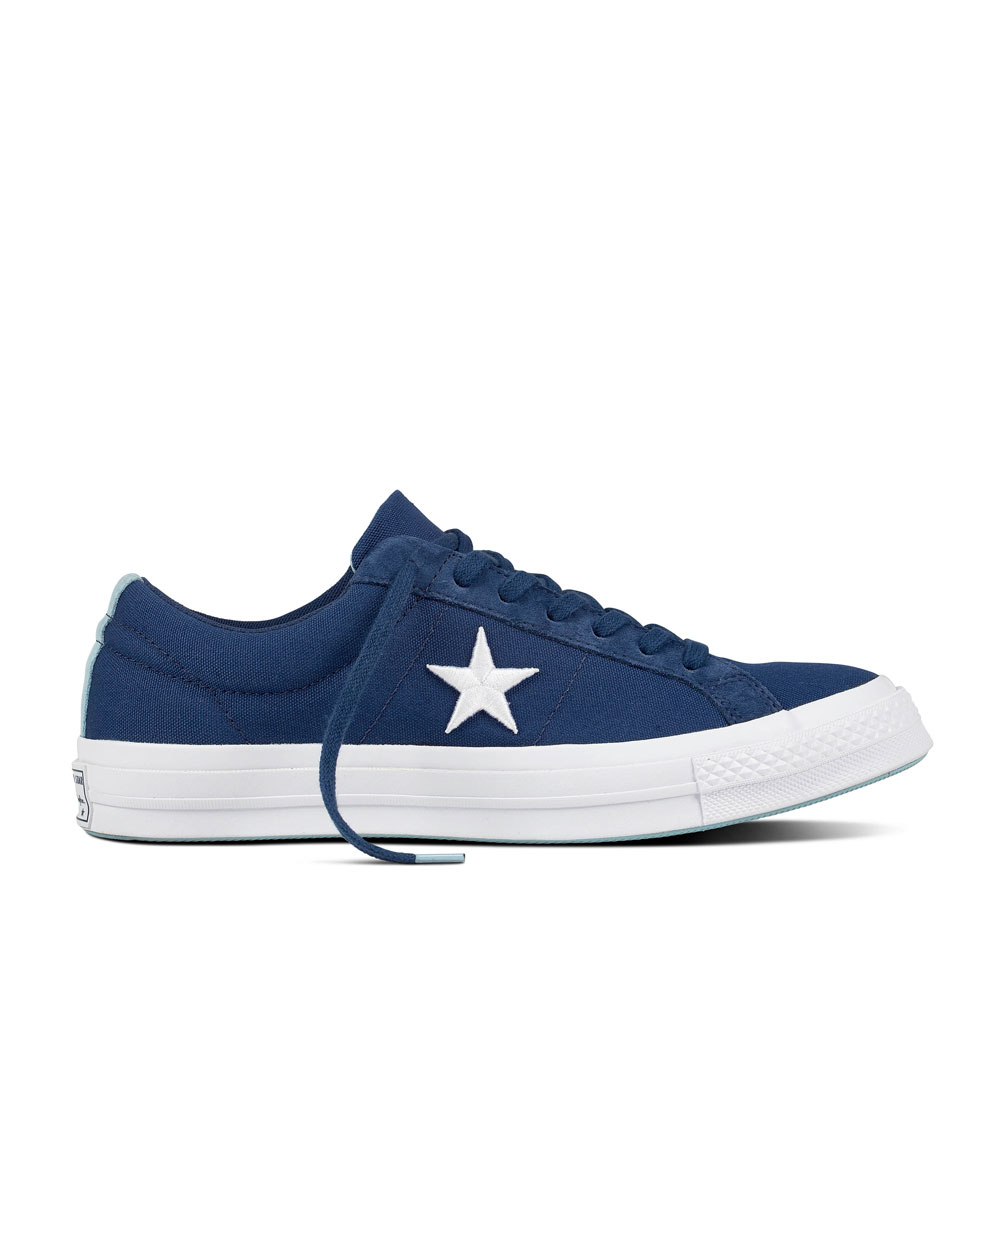 Converse One Star Ox (navy/white/ocean bliss)